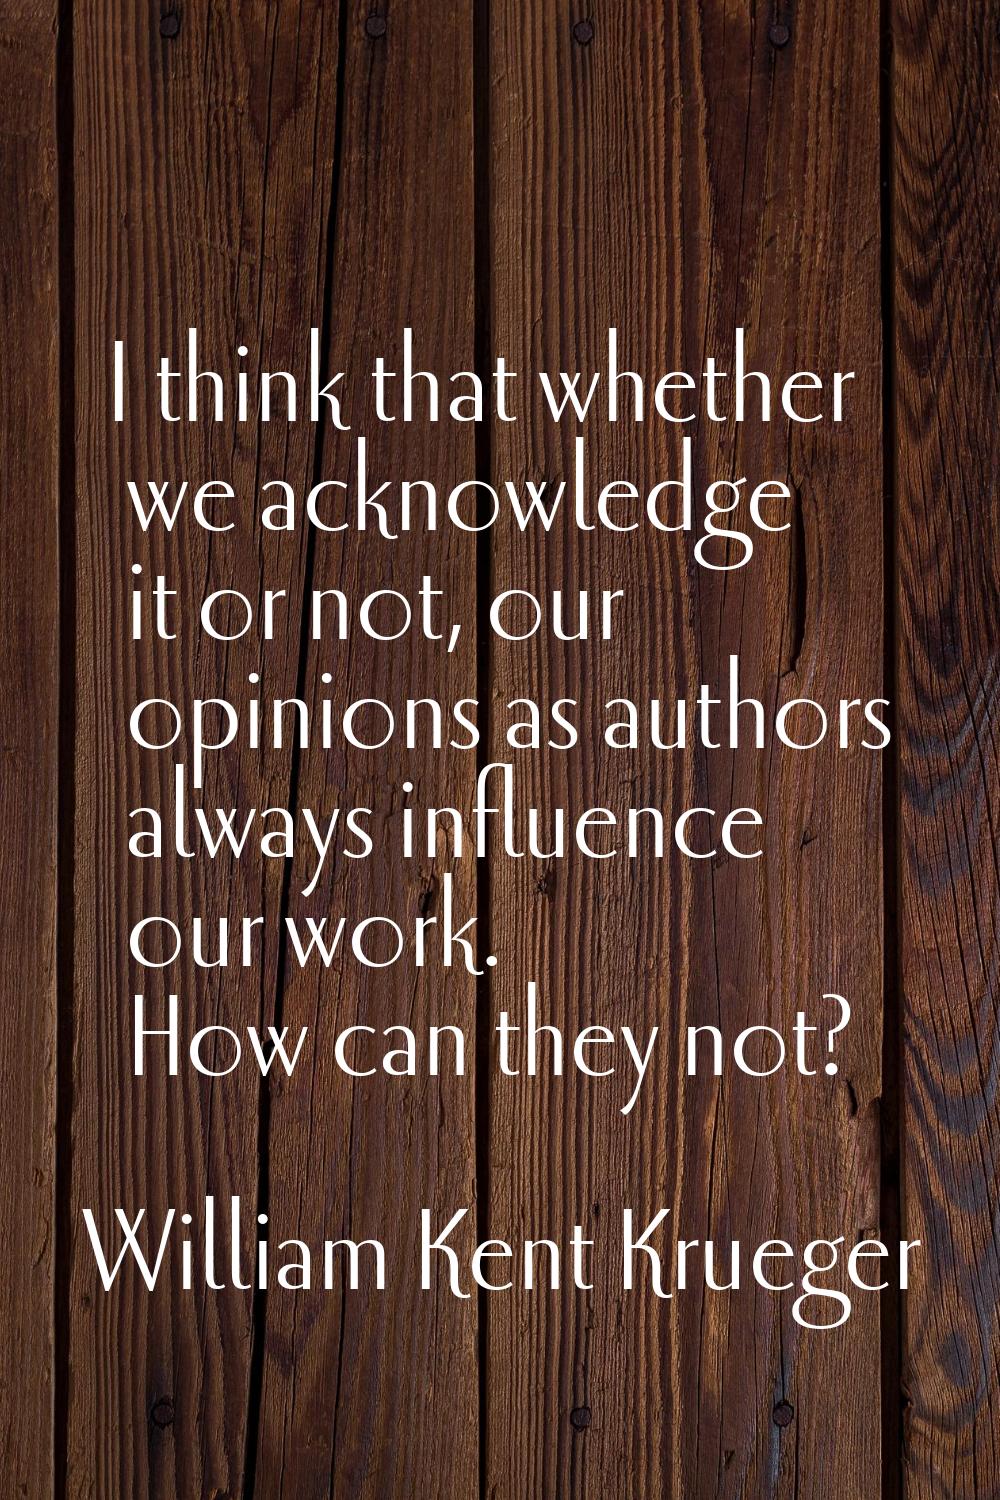 I think that whether we acknowledge it or not, our opinions as authors always influence our work. H